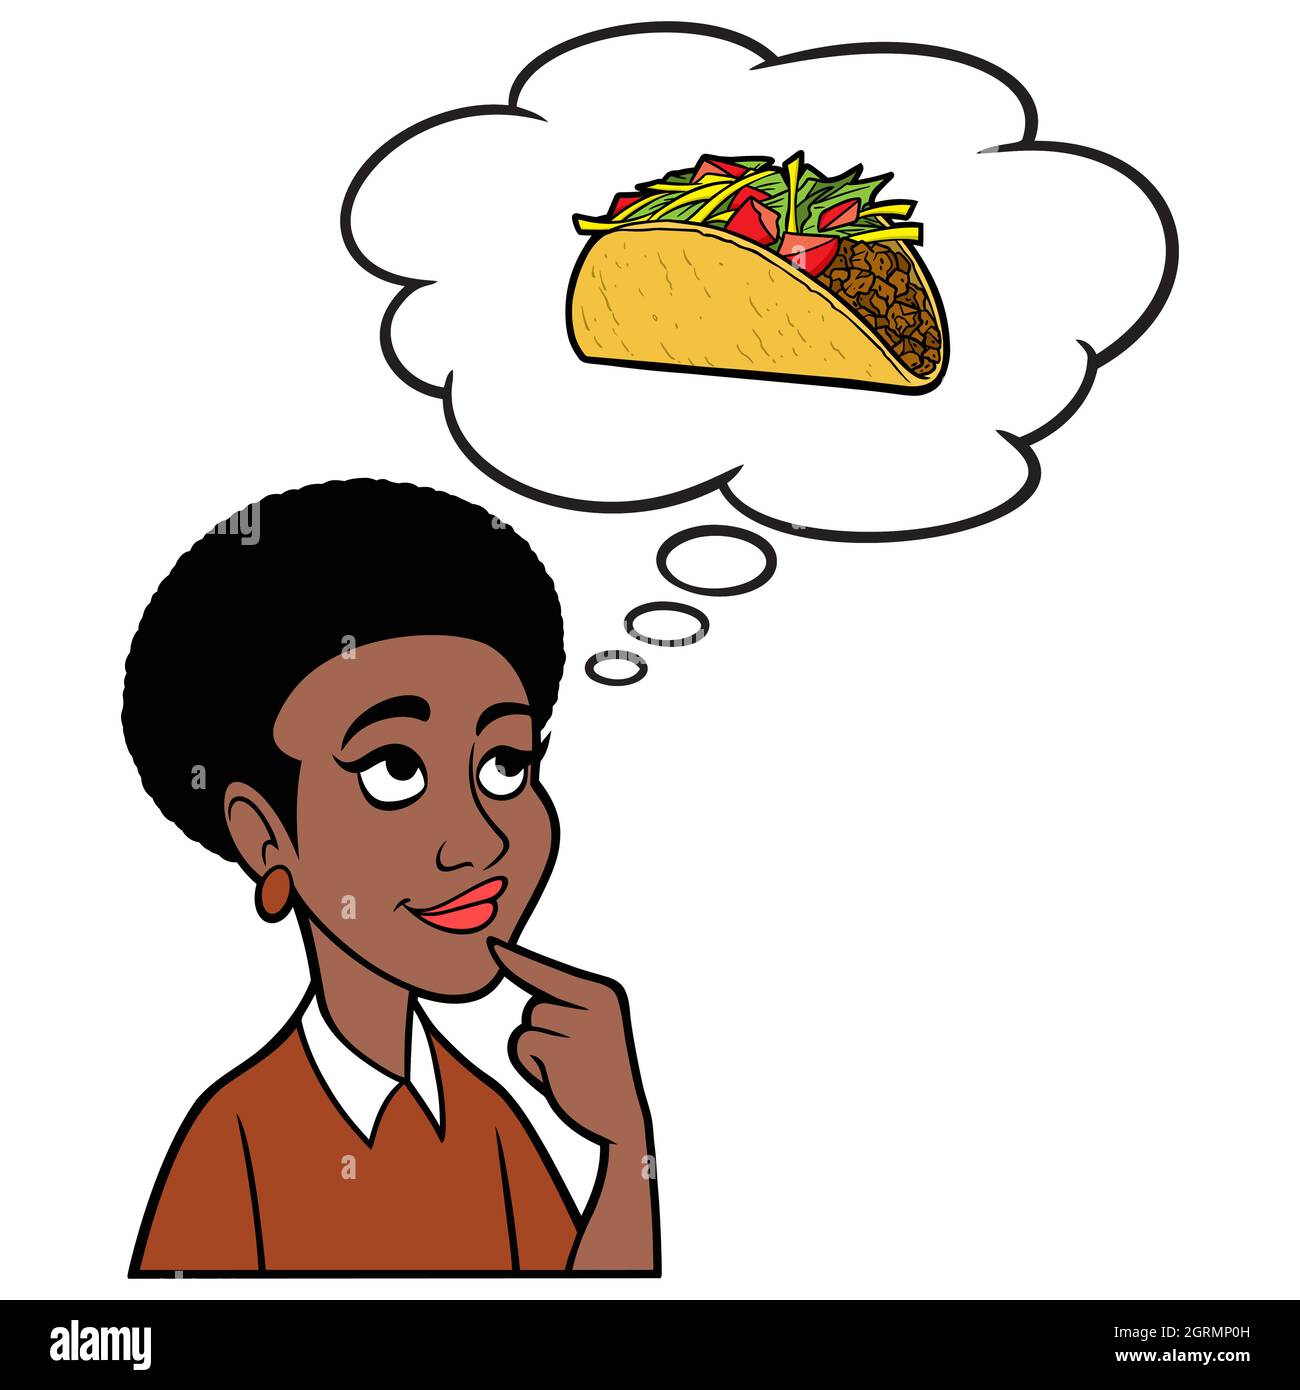 Woman thinking about a Taco - A cartoon illustration of a woman thinking about having a Taco for lunch. Stock Vector